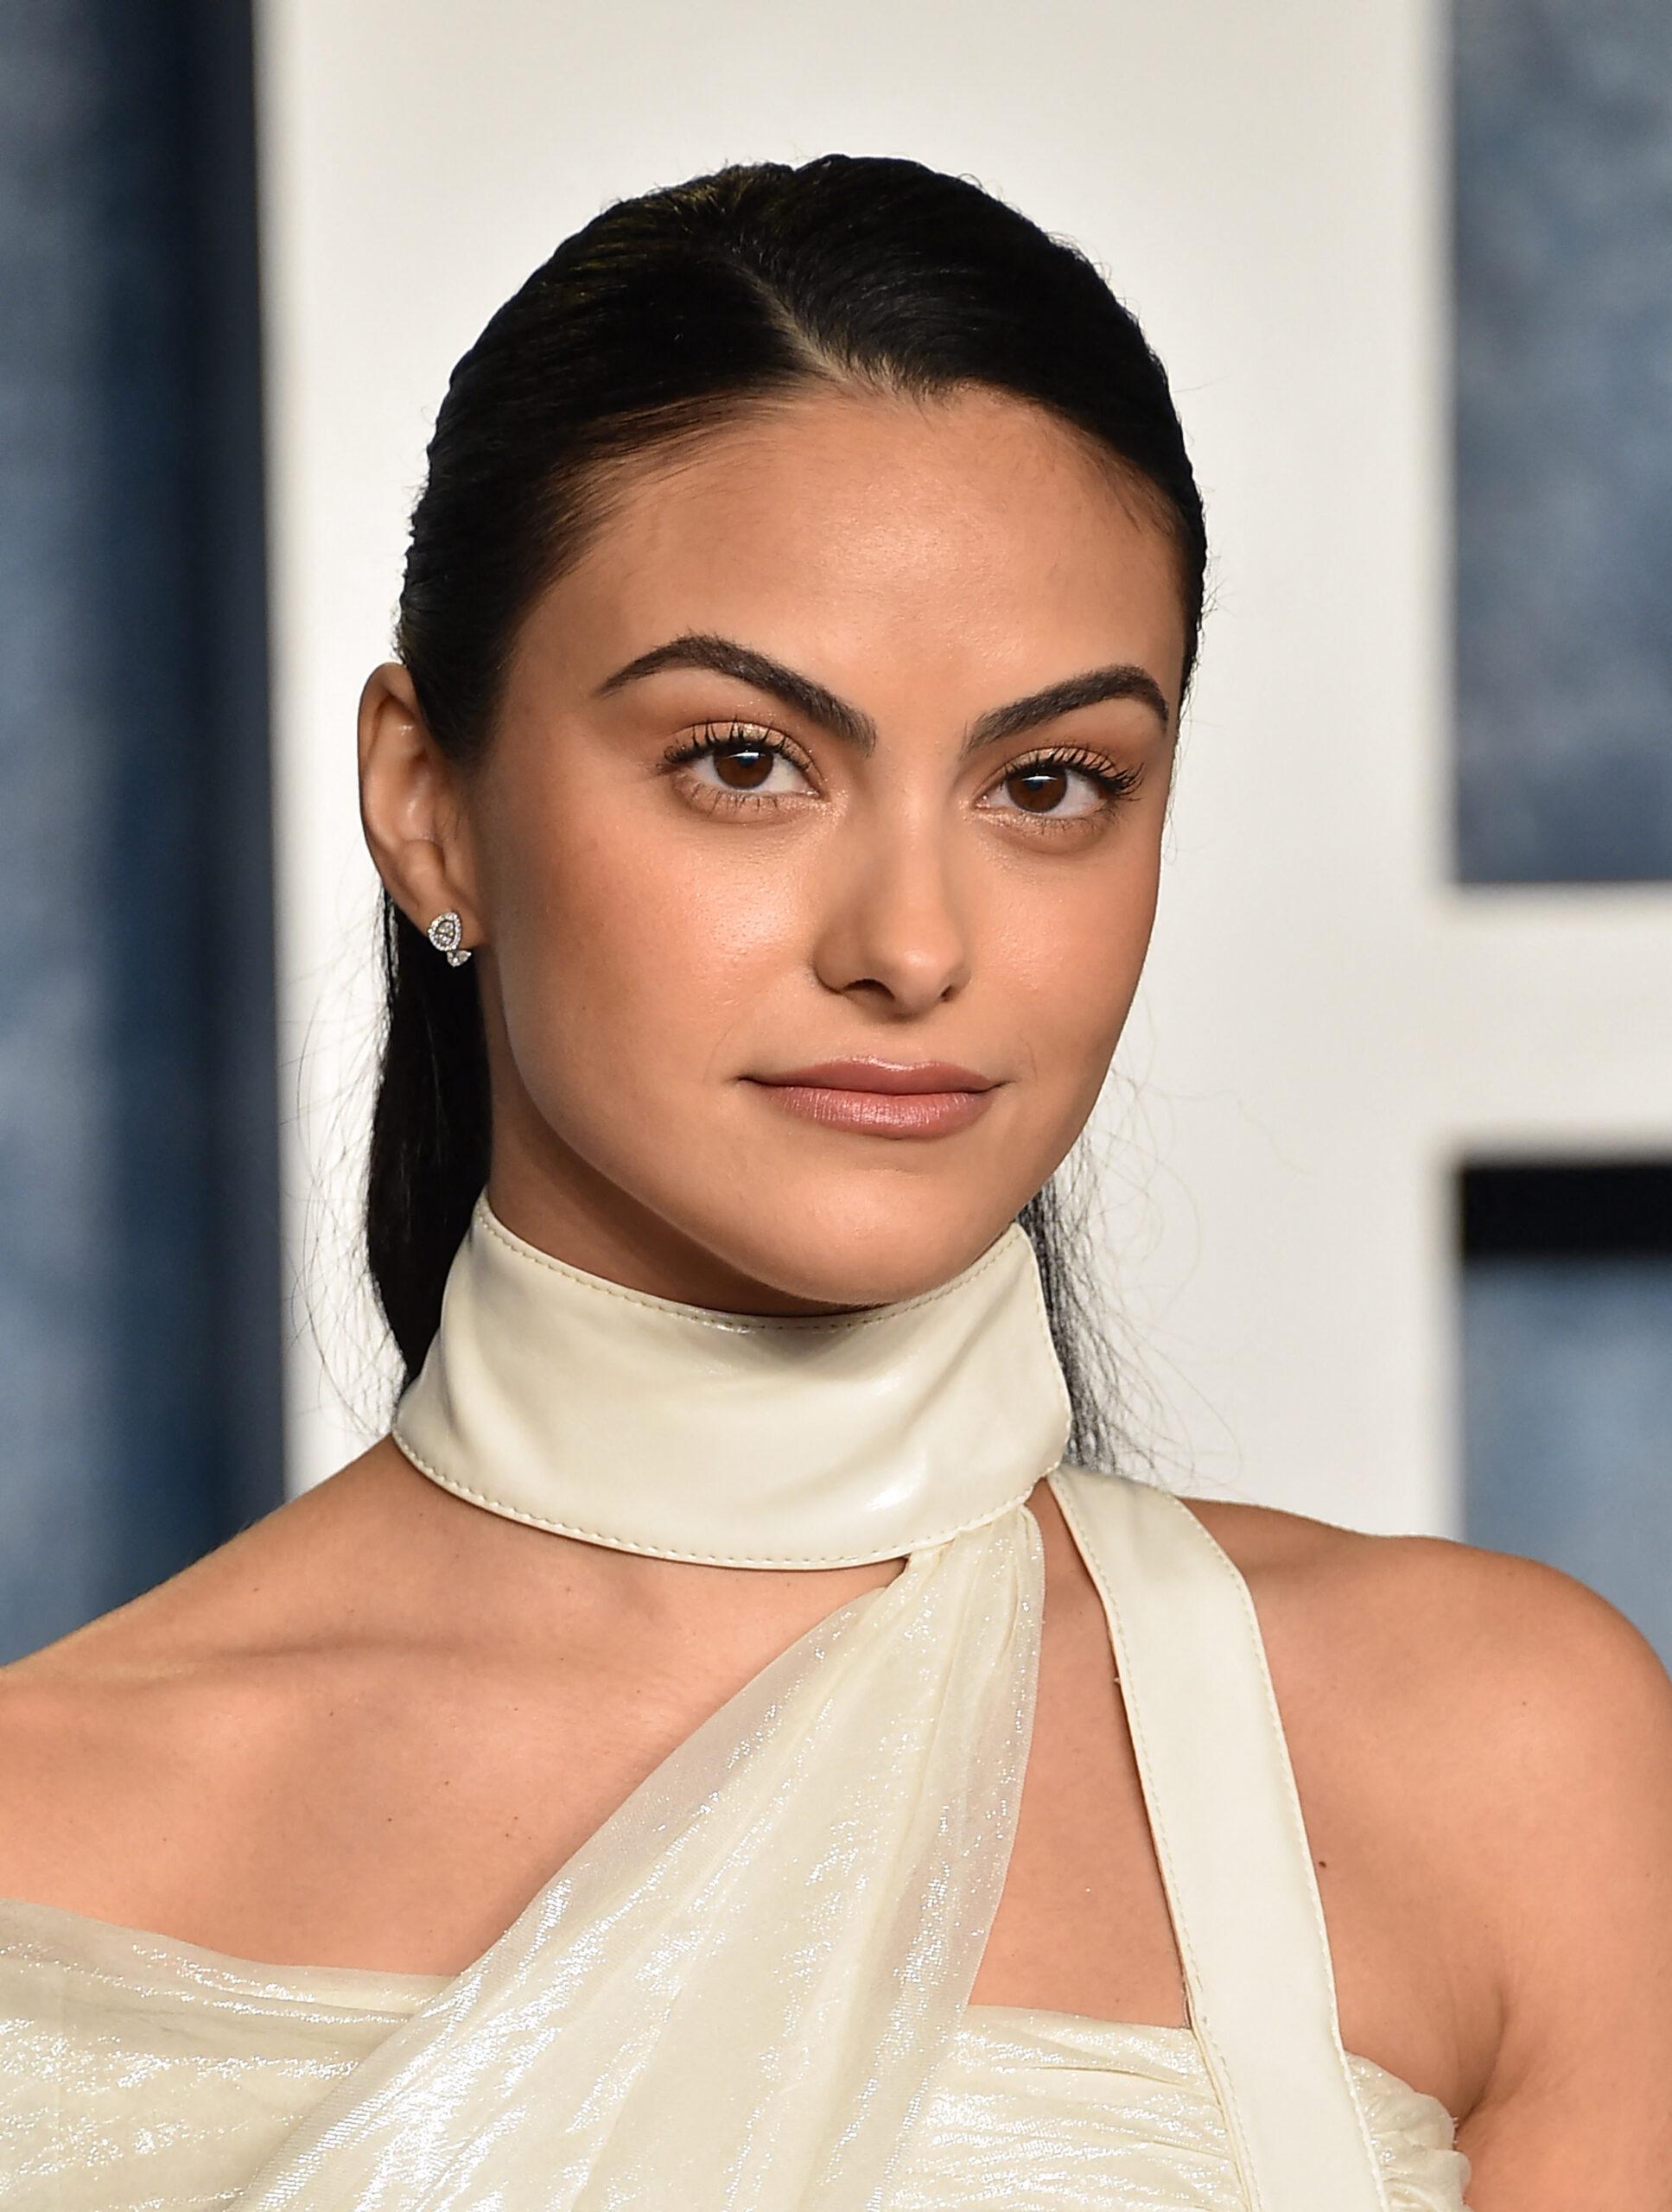 Camila Mendes Struggles With Acne, Admits She Picks At It 'Until It Bleeds'